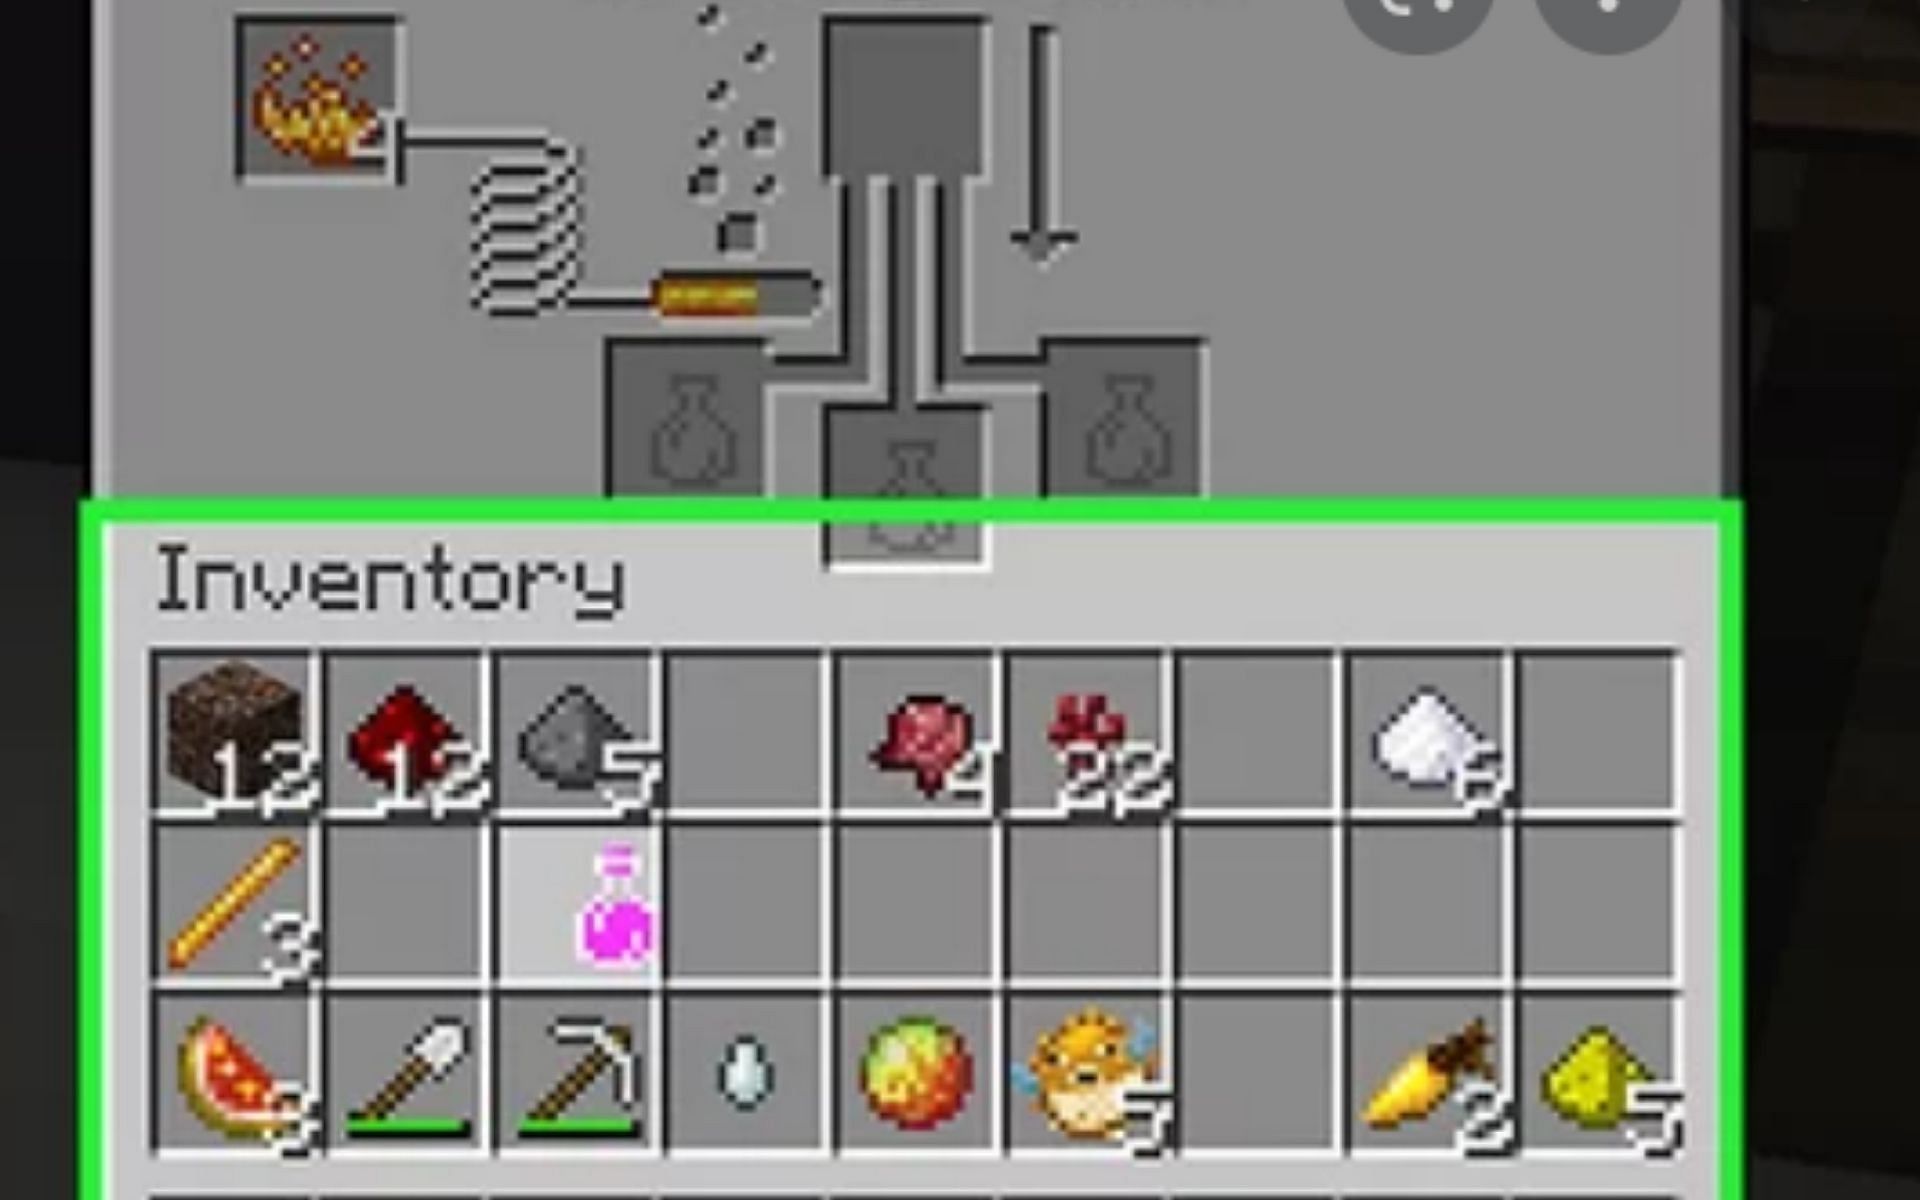 The ingredients required to brew a potion in Minecraft (Image via Minecraft)